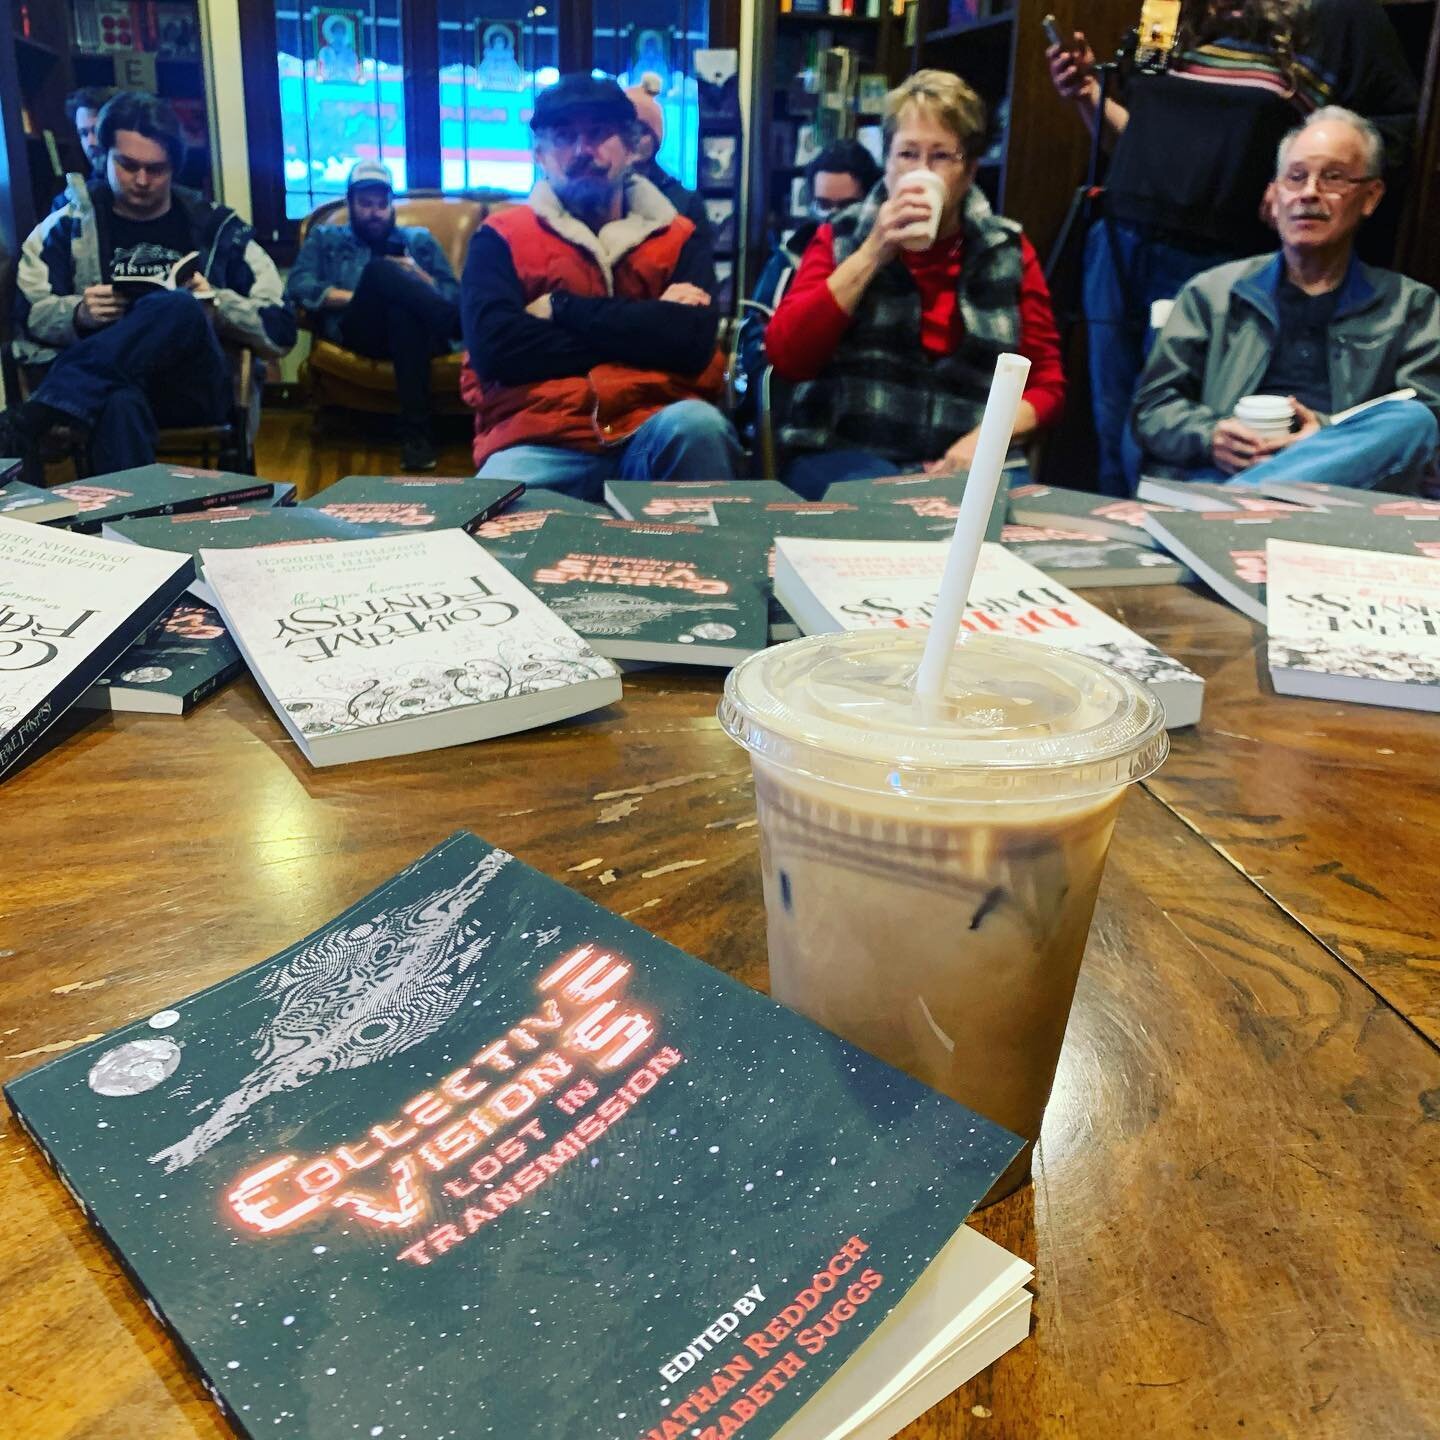 Our books are available at @legendariumbooks in Salt Lake City as well other great local booksellers and online as well. 📚 

#writersofinstagram #writingcommunity #writer #indieauthor #indiebookstore #authorsofinstagram #scifi #scifibooks #sciencefi